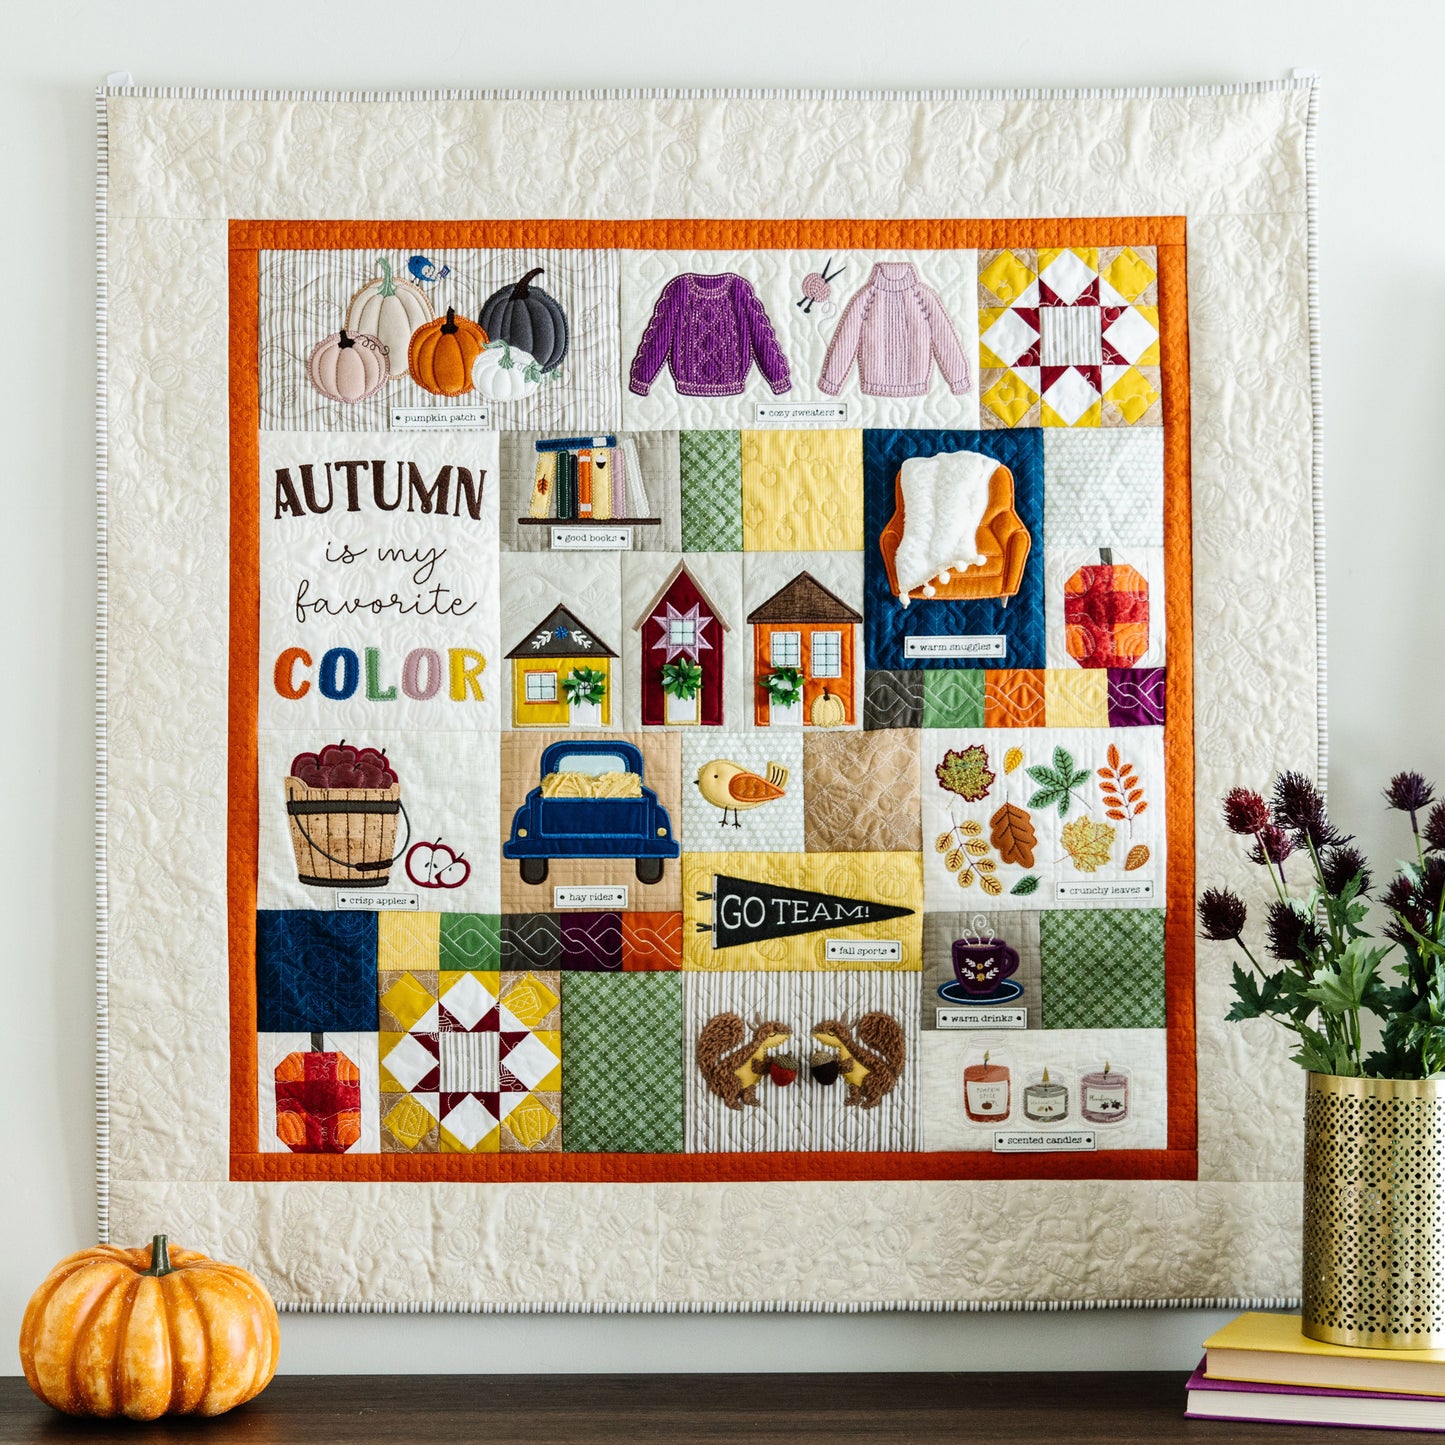 Falling for Autumn Feature Quilt KD814